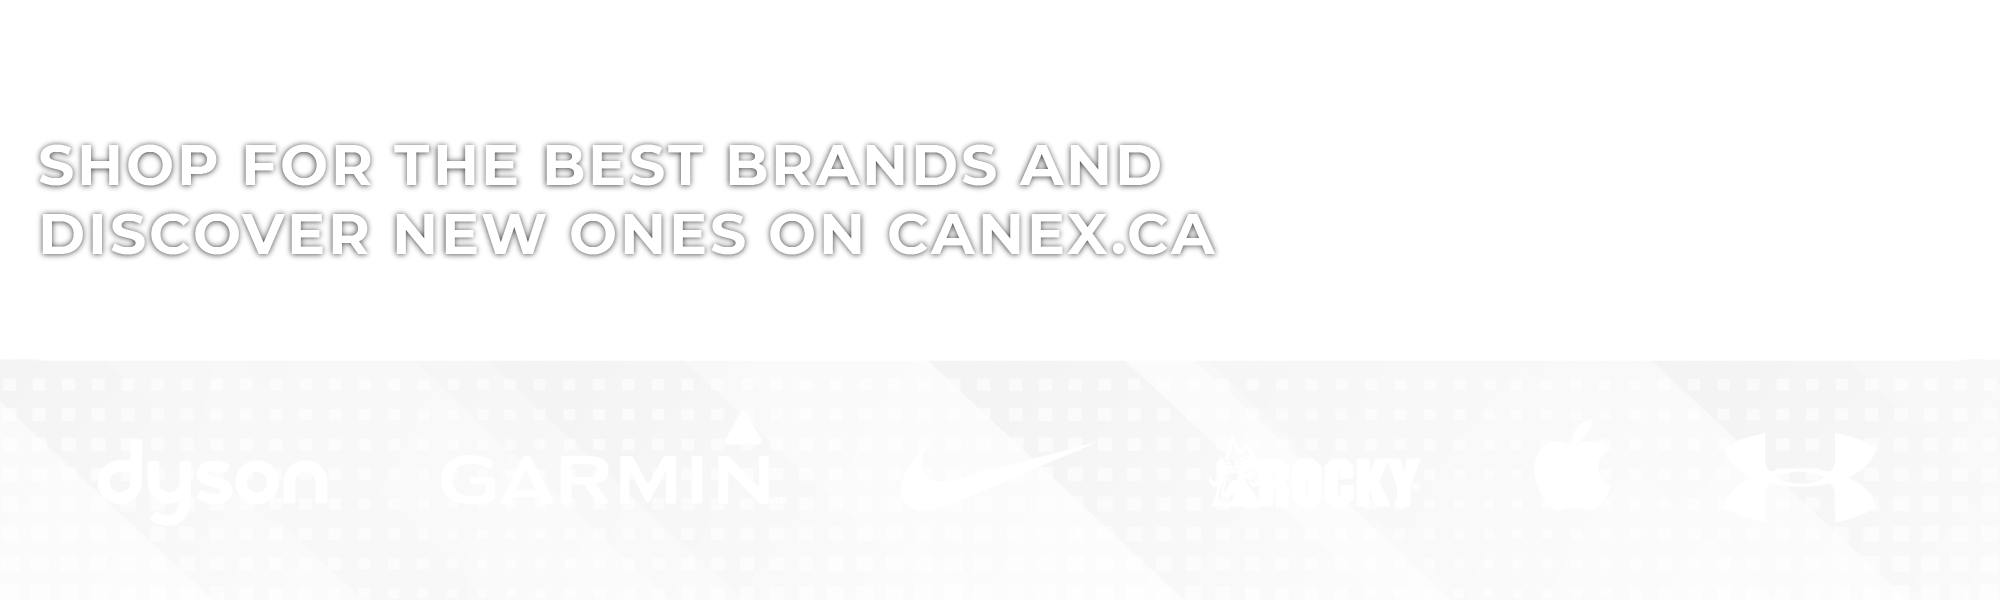 Shop for the best brands and discover new ones on CANEX.ca - Shop by brands